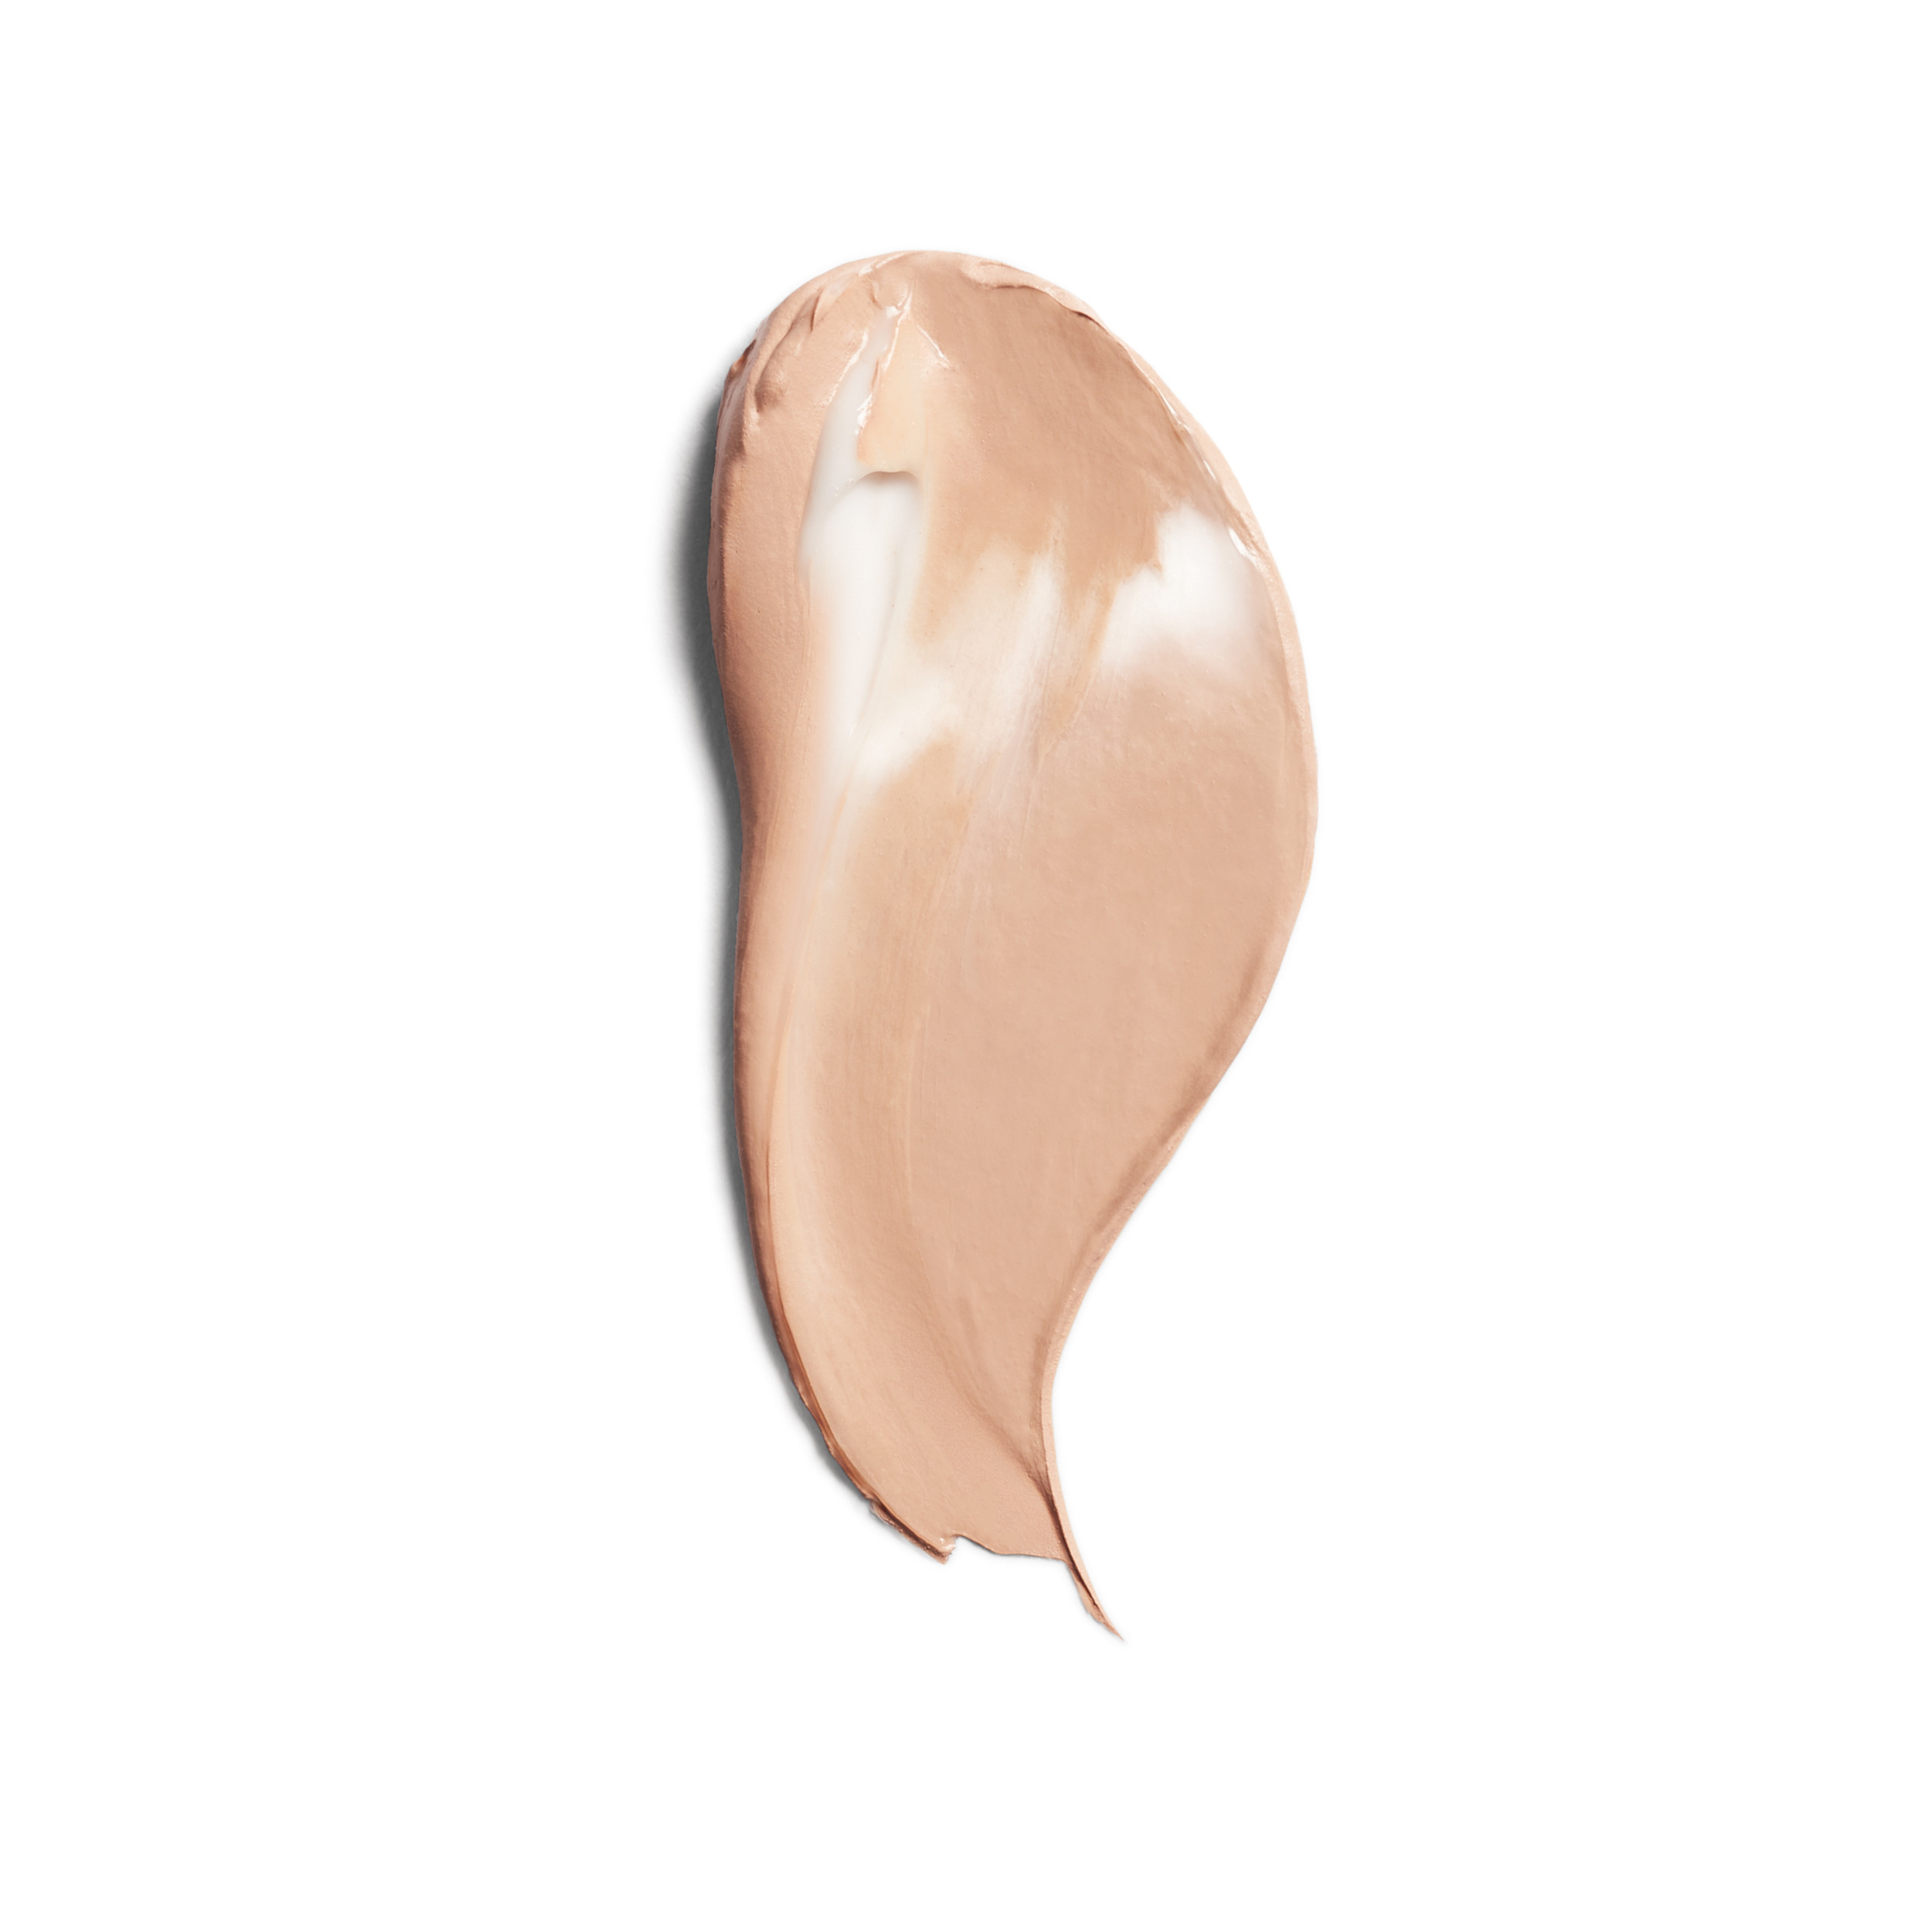 COVERGIRL + OLAY Simply Ageless Instant Wrinkle-Defying Foundation with SPF 28, Creamy Beige, 0.44 oz - image 3 of 9